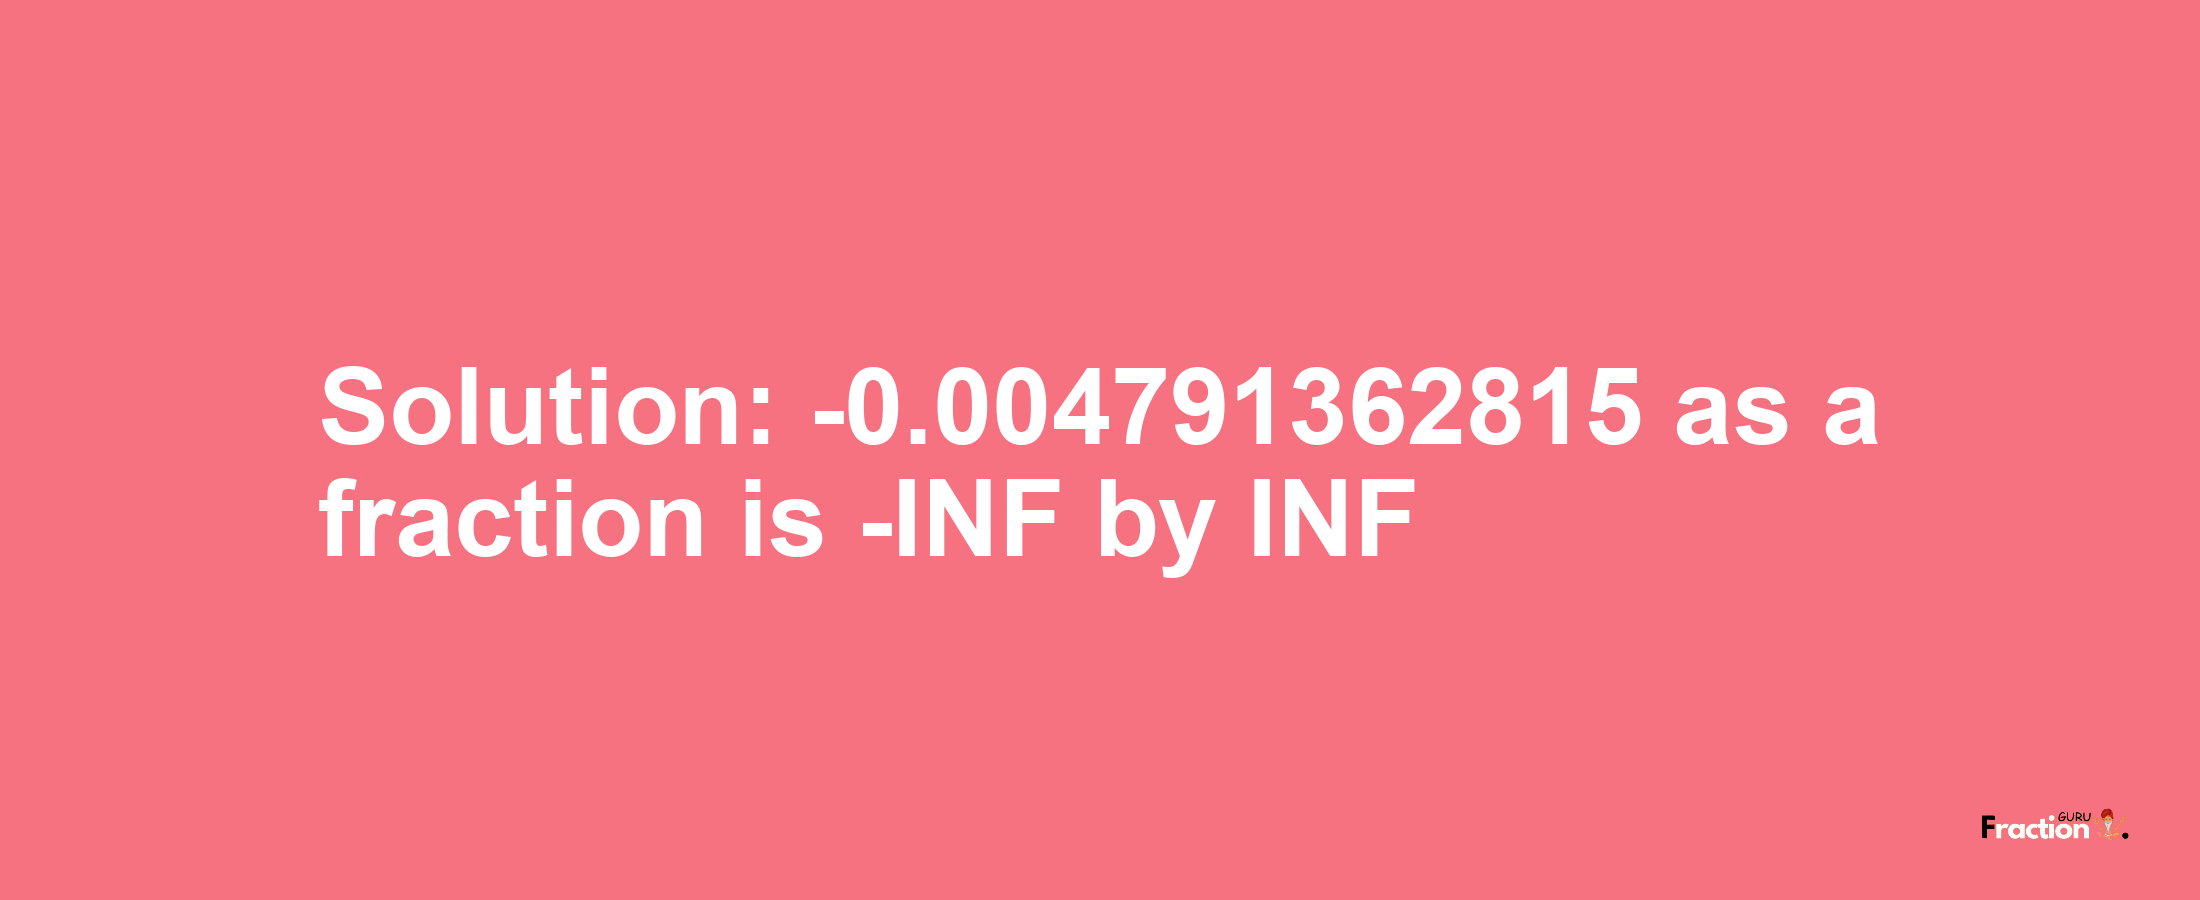 Solution:-0.004791362815 as a fraction is -INF/INF